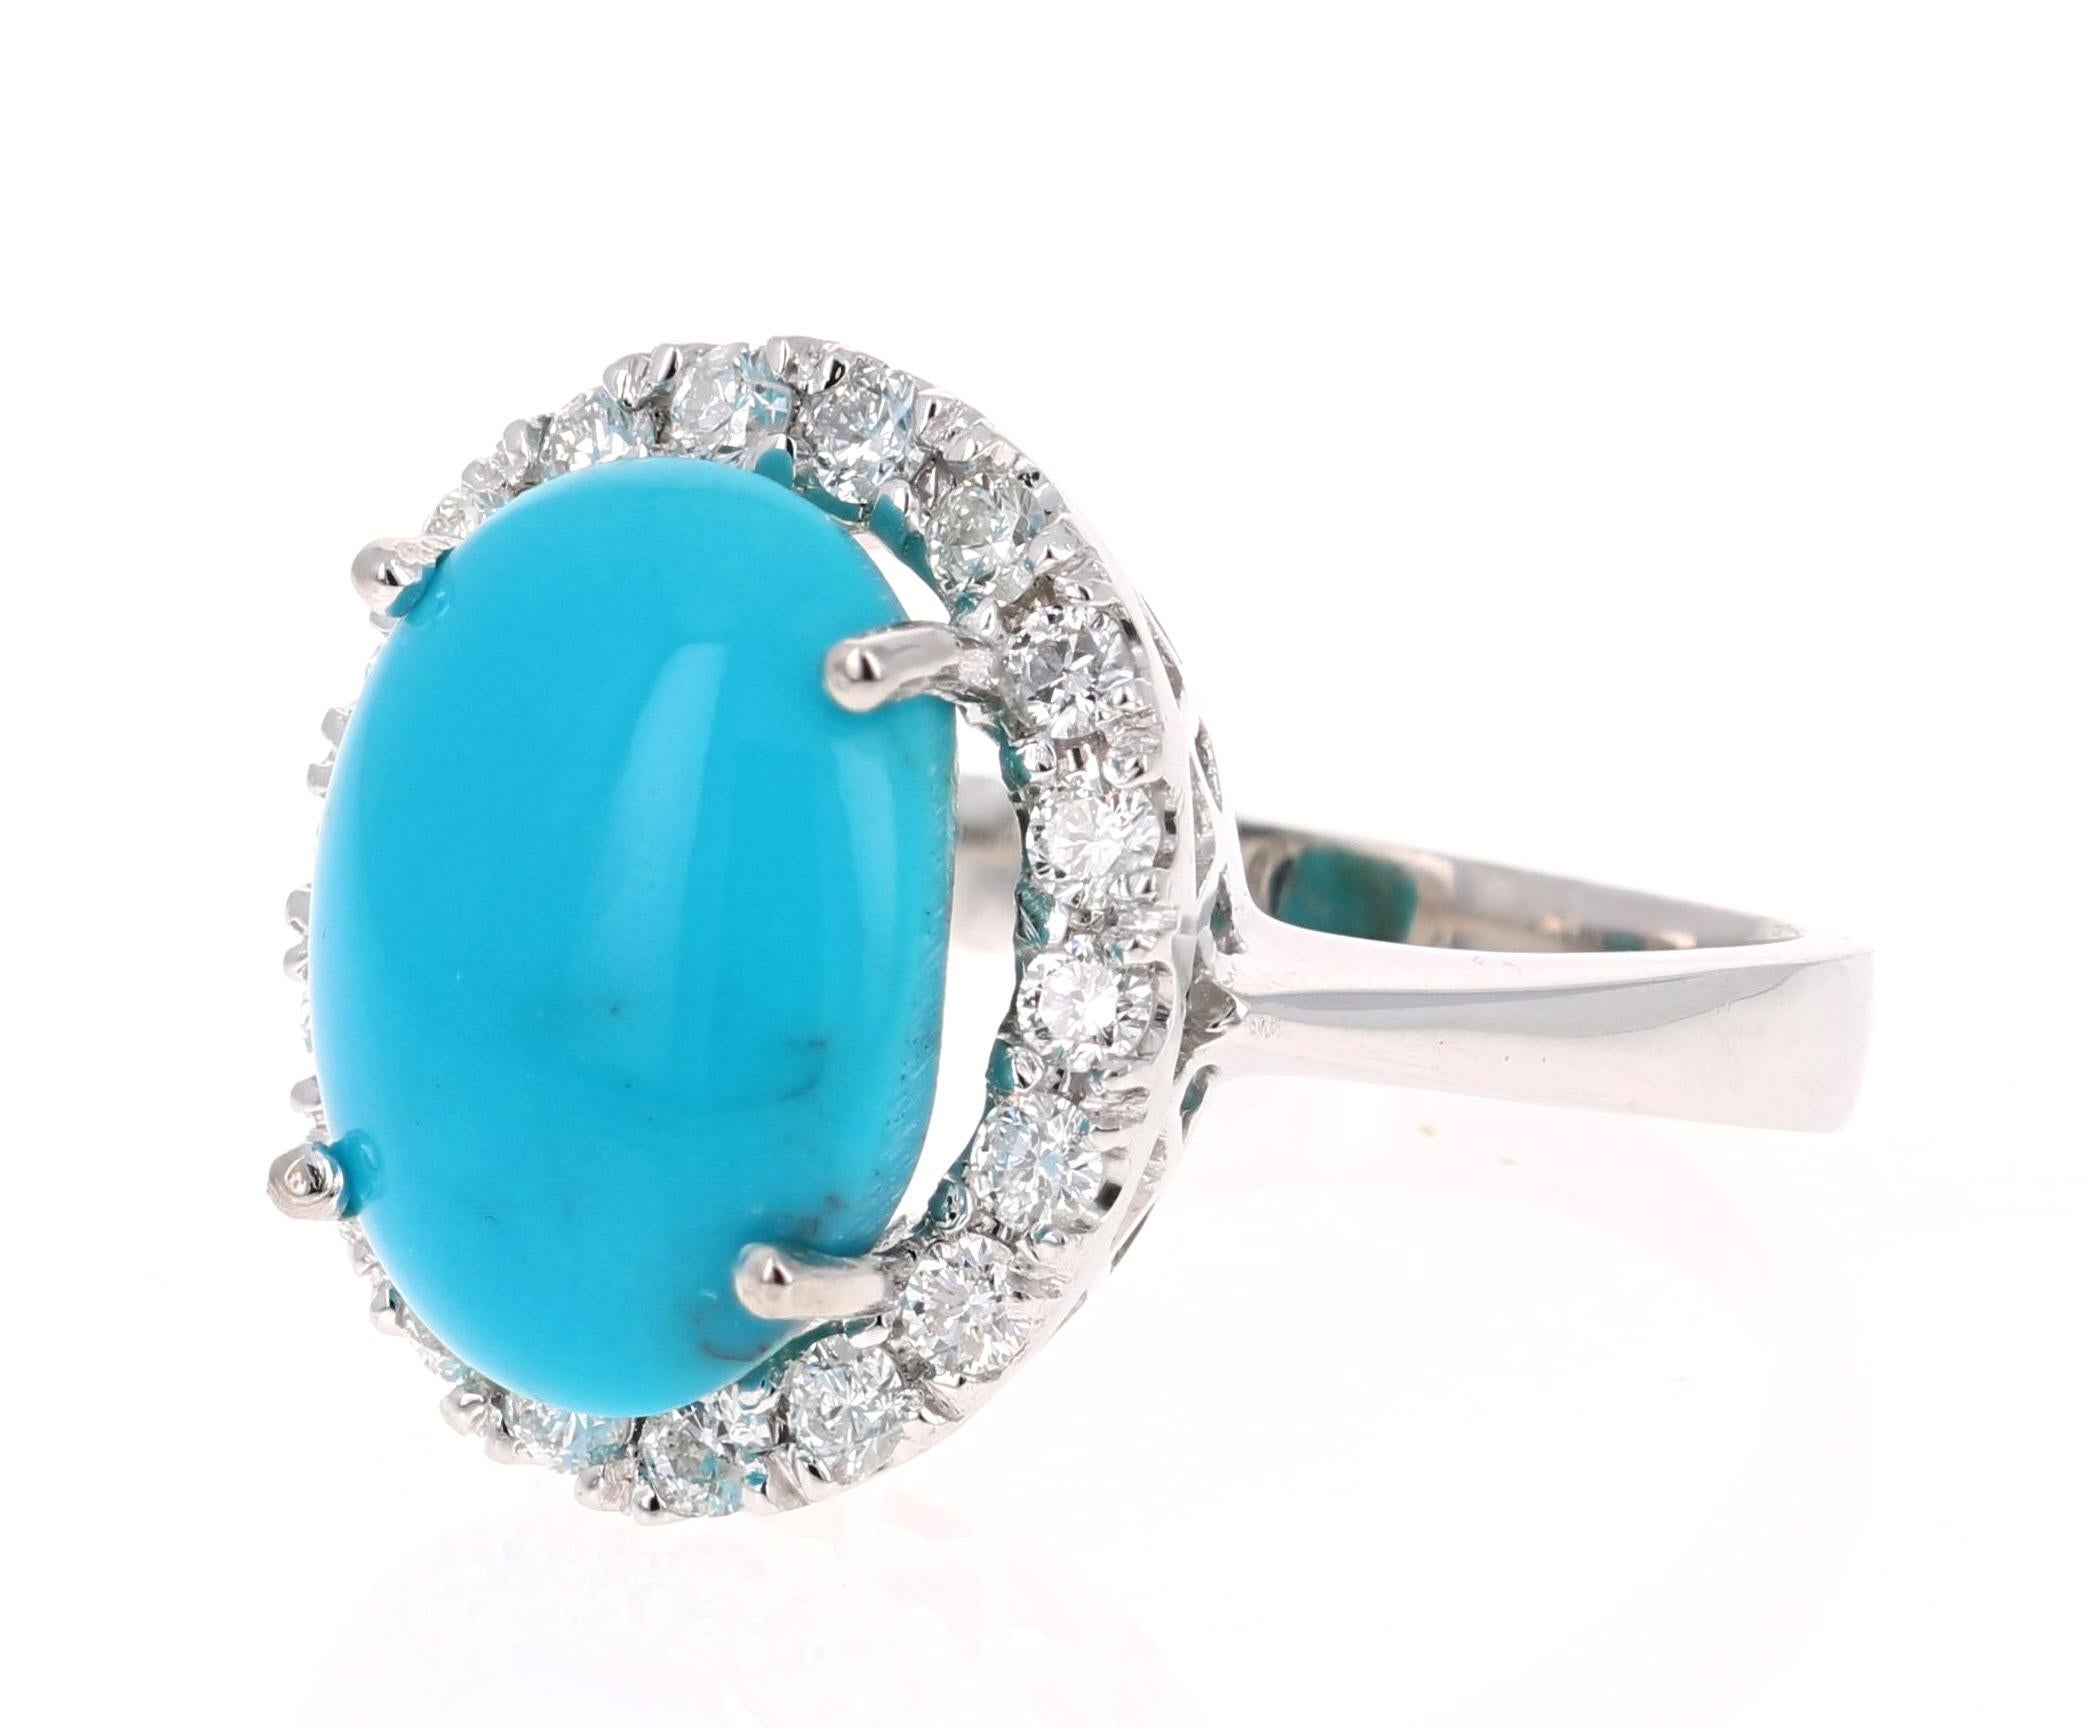 Contemporary 7.28 Carat Oval Cut Turquoise Diamond White Gold Cocktail Ring